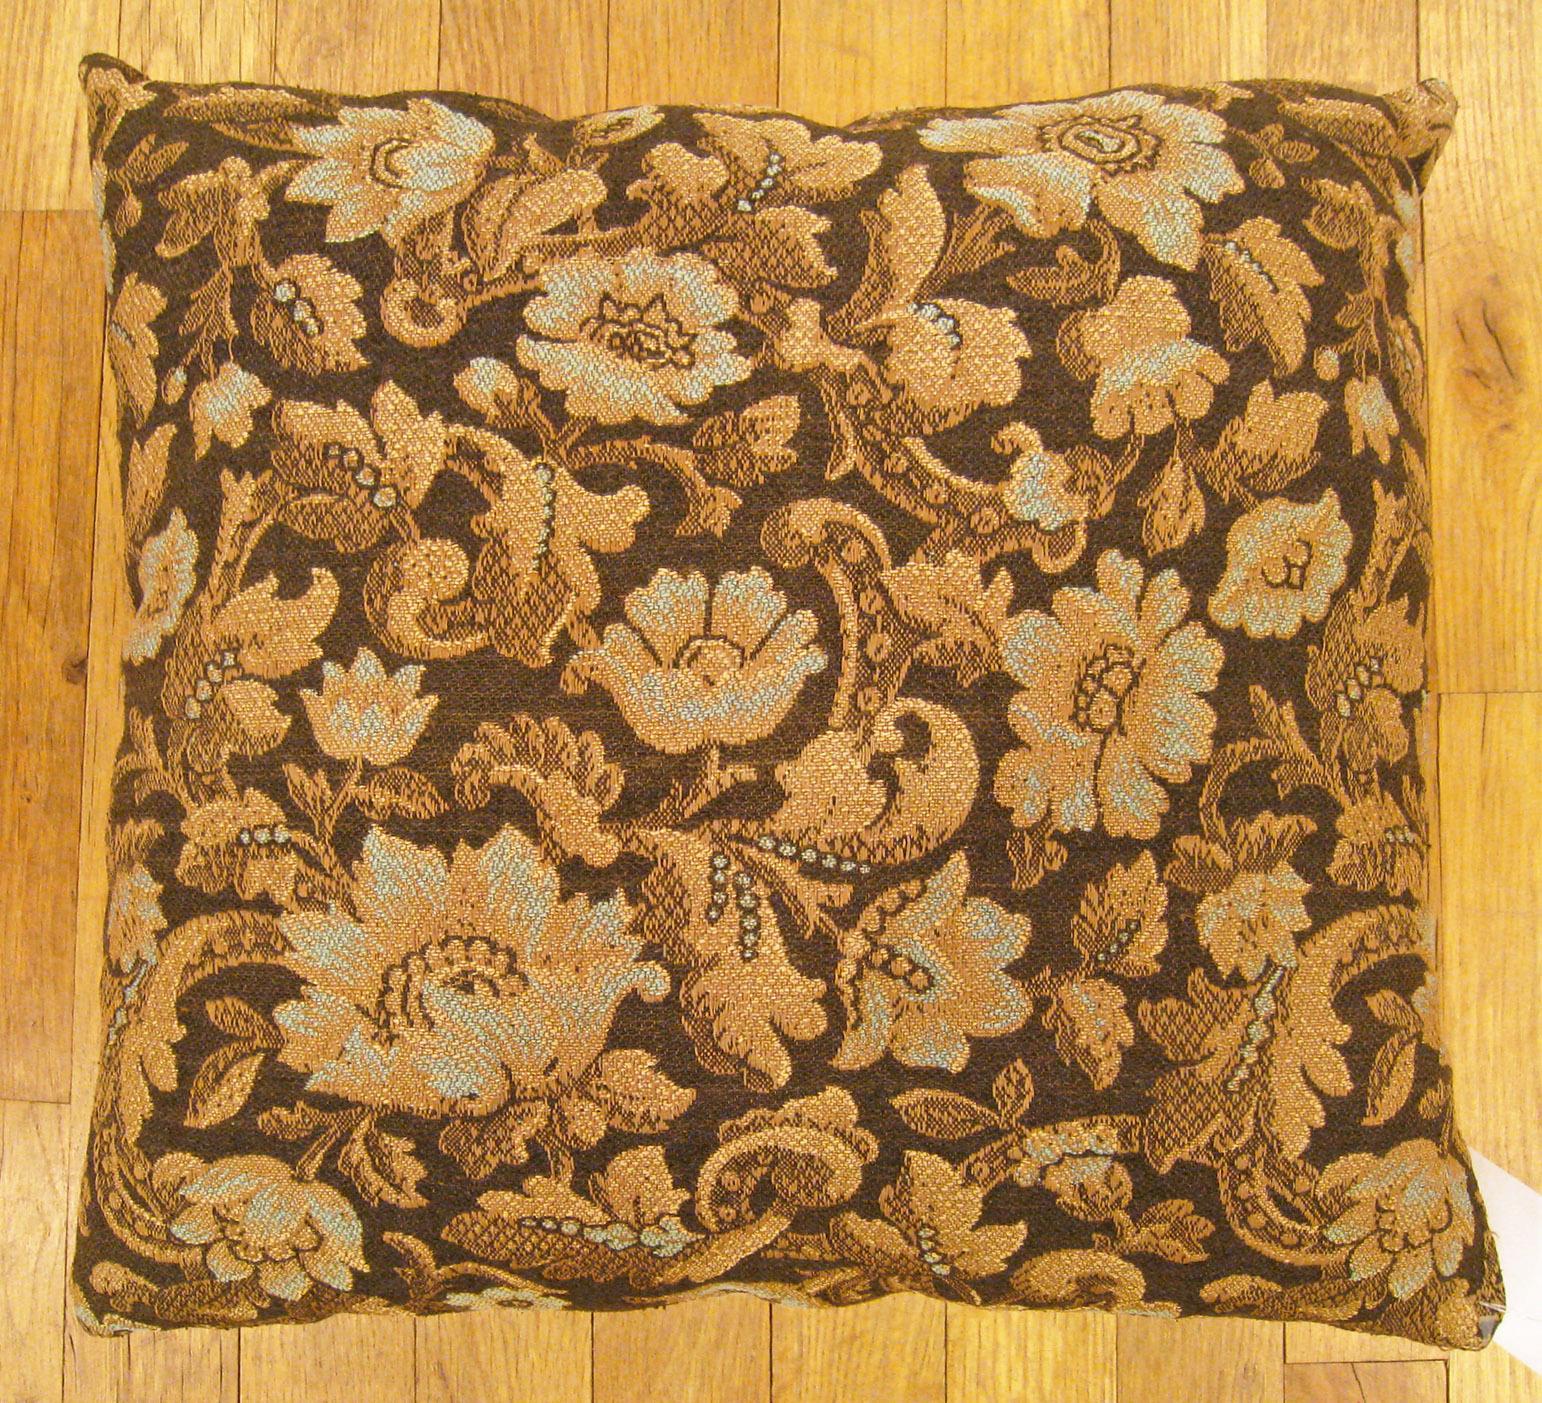 Antique Jacquard Tapestry pillow; size 1'5” x 1'5”.

An antique decorative pillow with floral elements allover a light gold central field, size 1'5